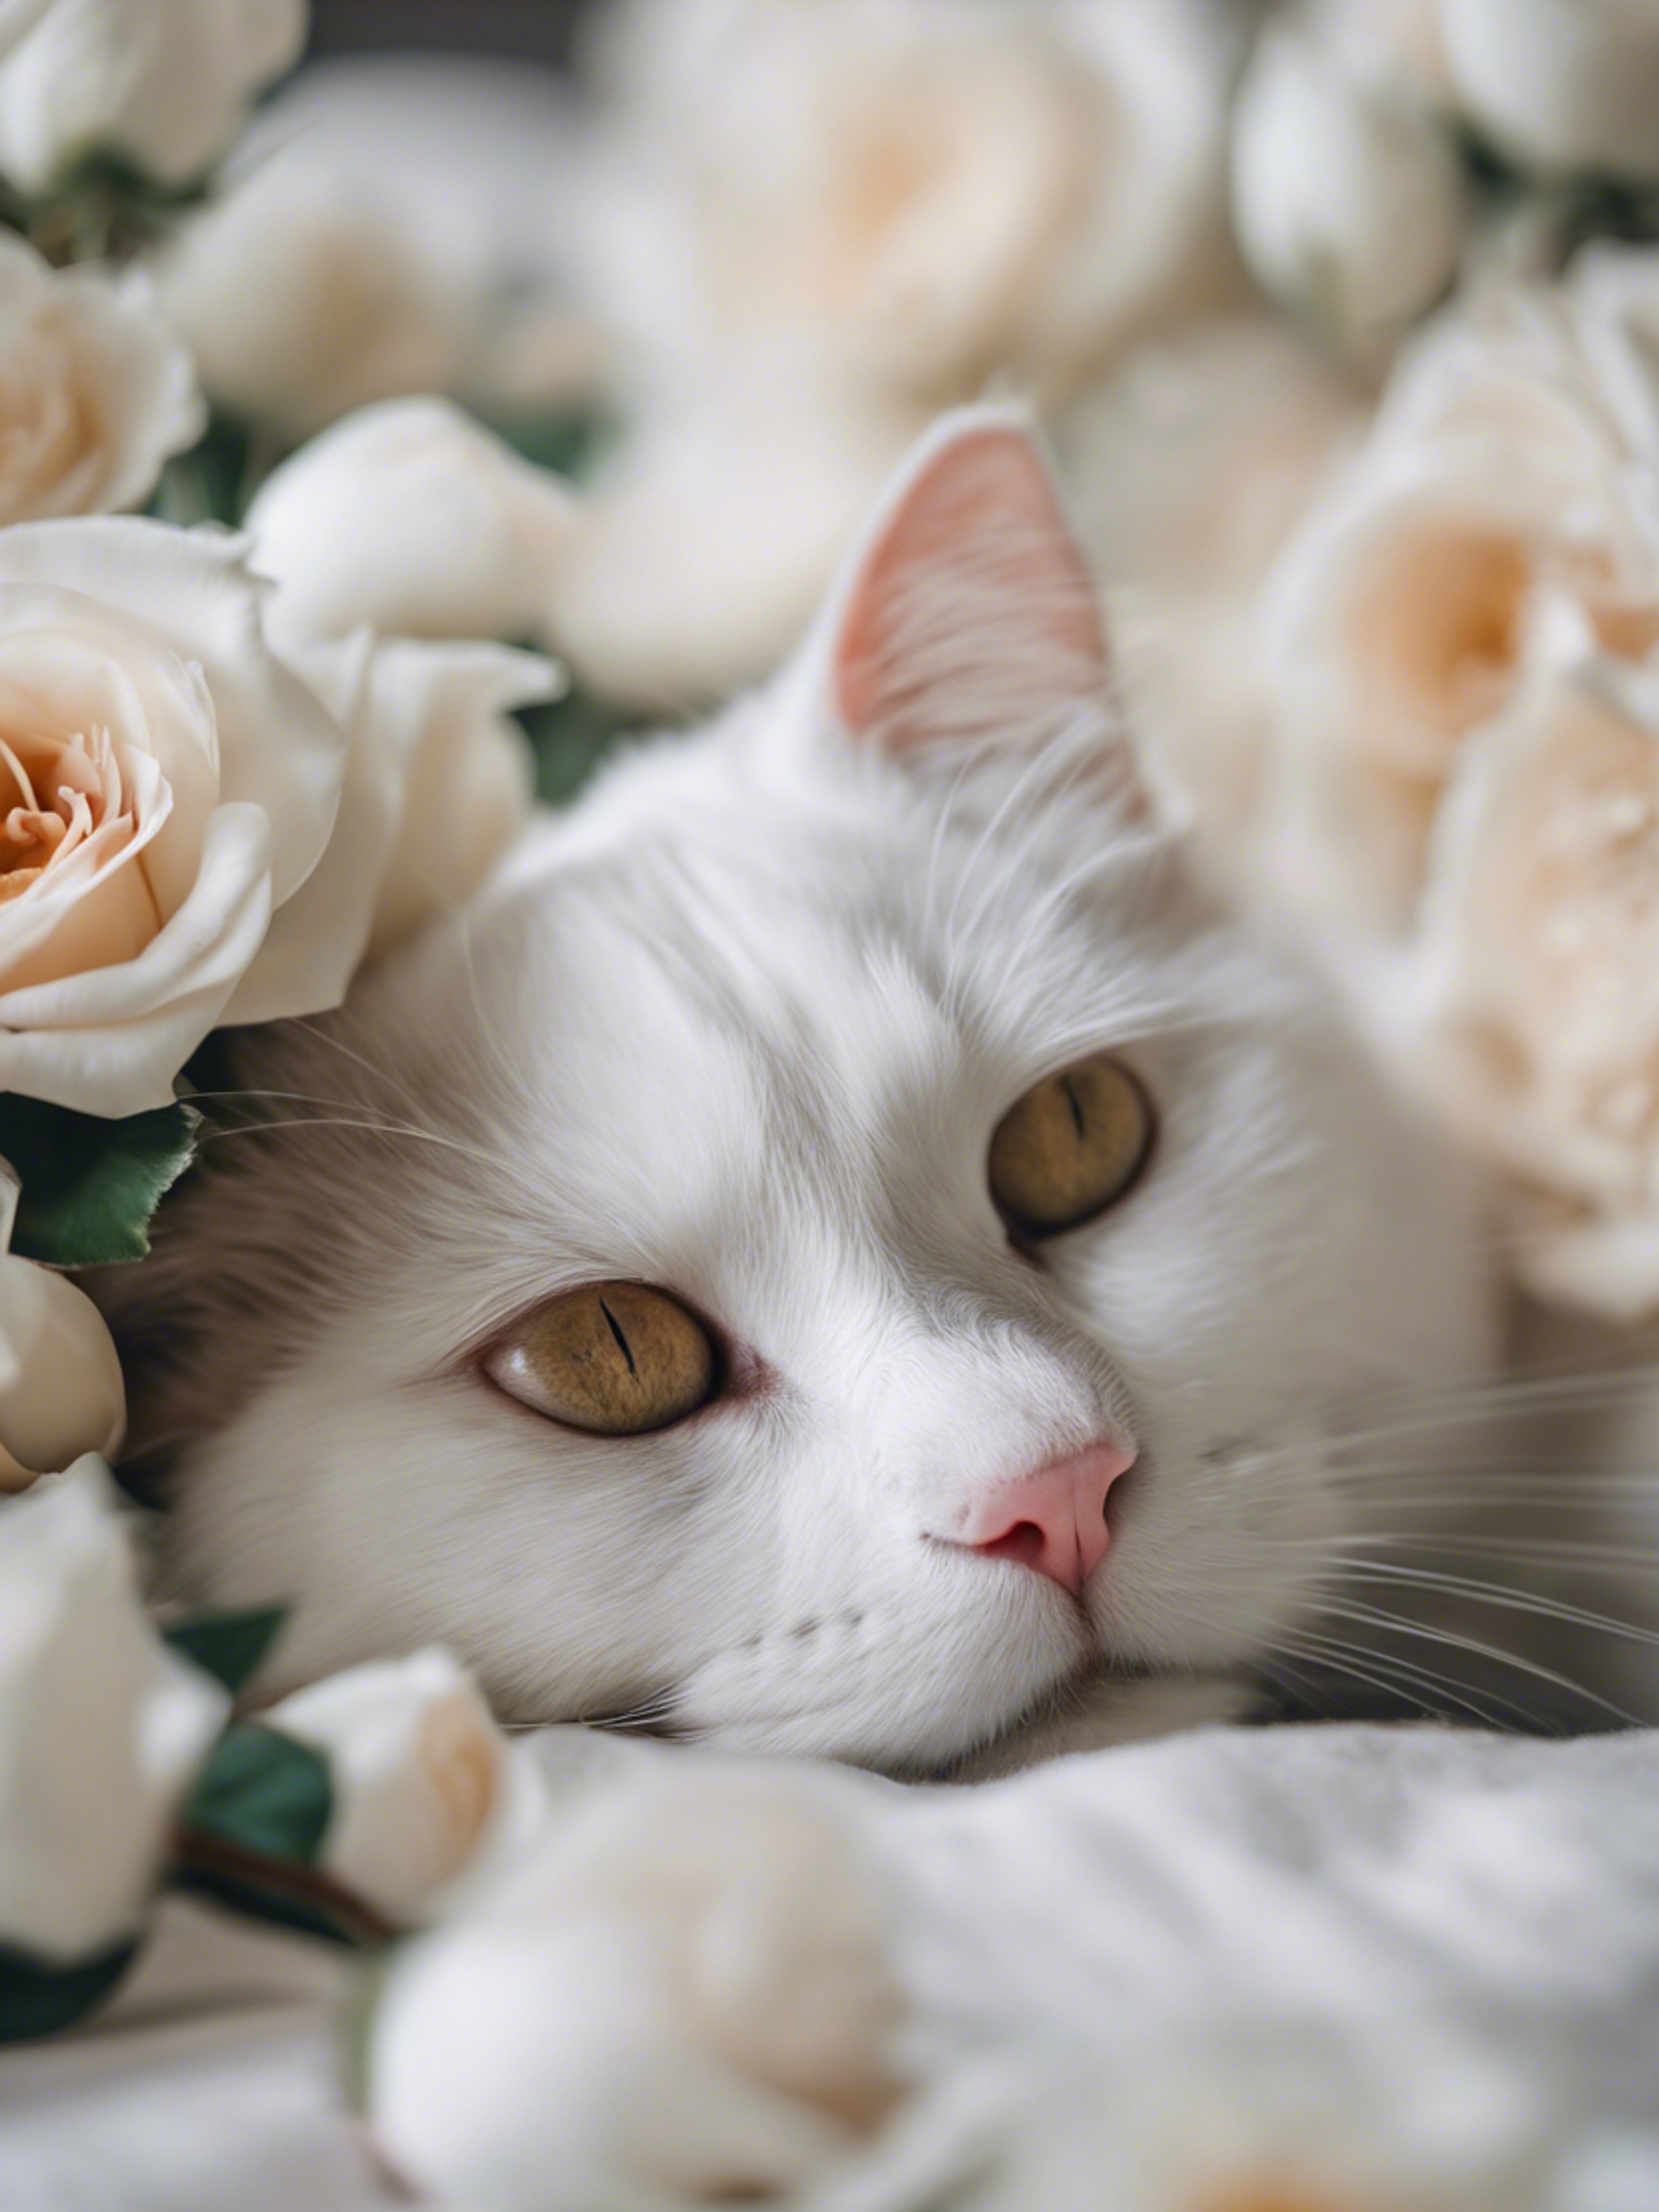 A picturesque content white cat sleeping amidst a bed of white roses. Tapet[21bd514b84c74c92a754]